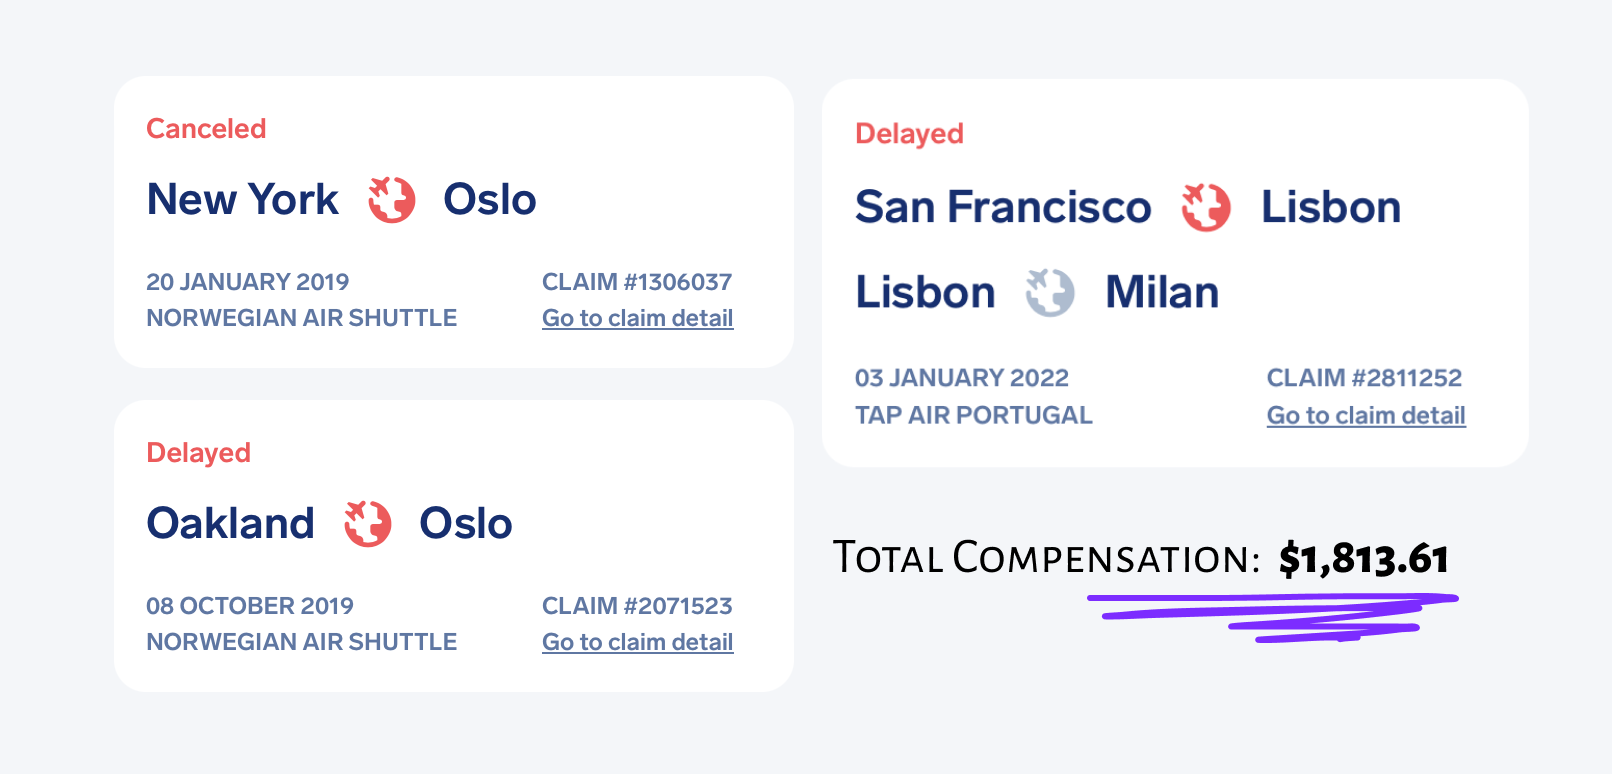 Screenshots of my successful Airhelp claims filed between 2019 and 2022.